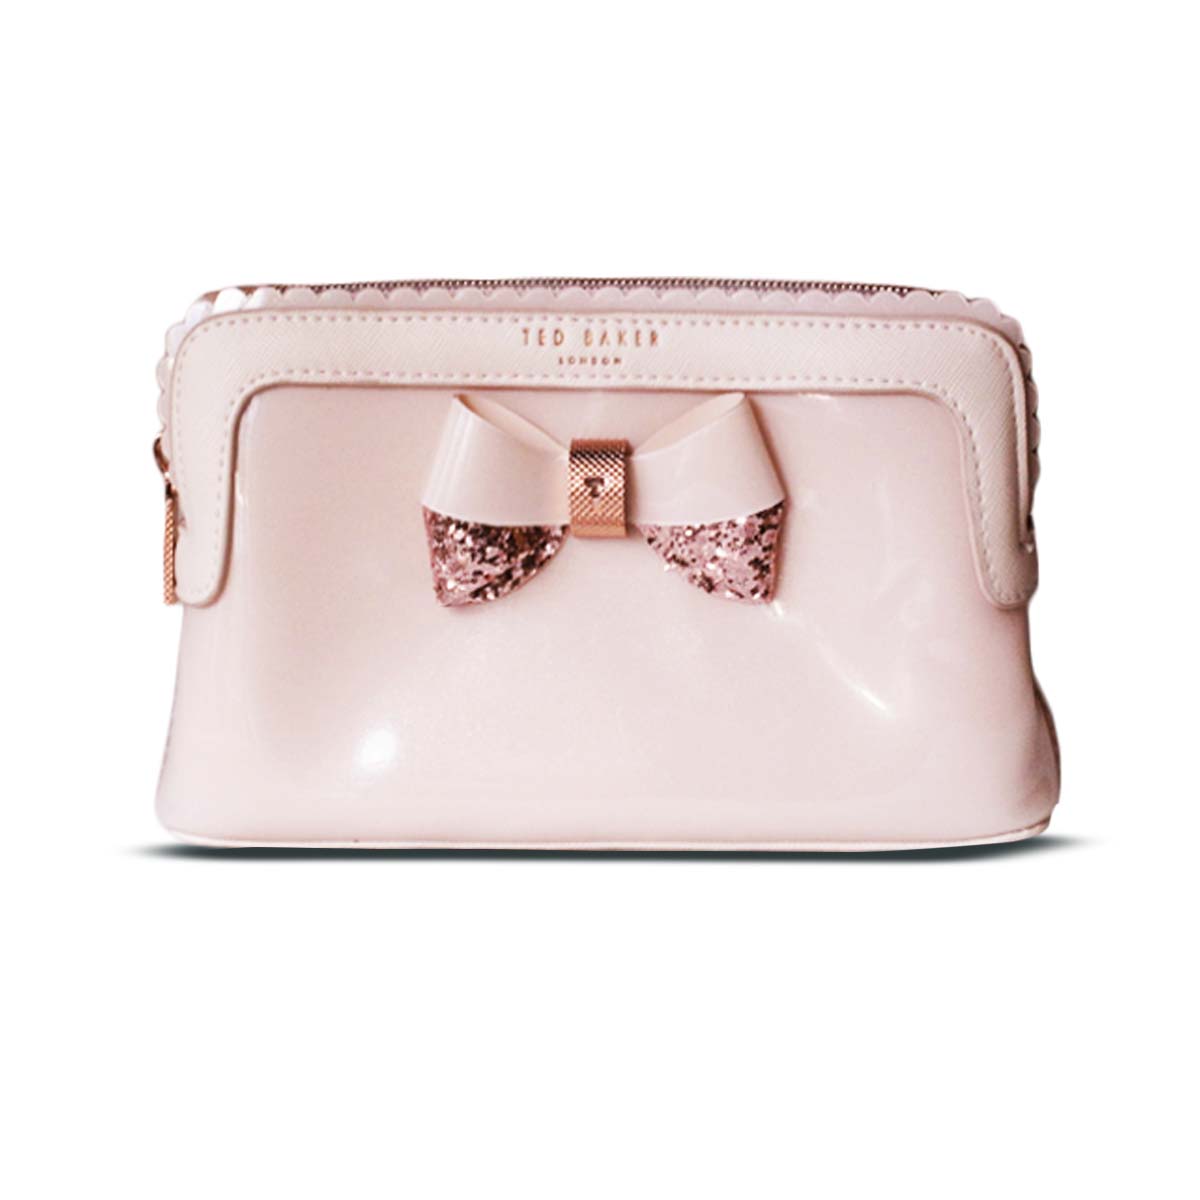 TED BAKER Ardith Cosmetic clutch - finga-nails